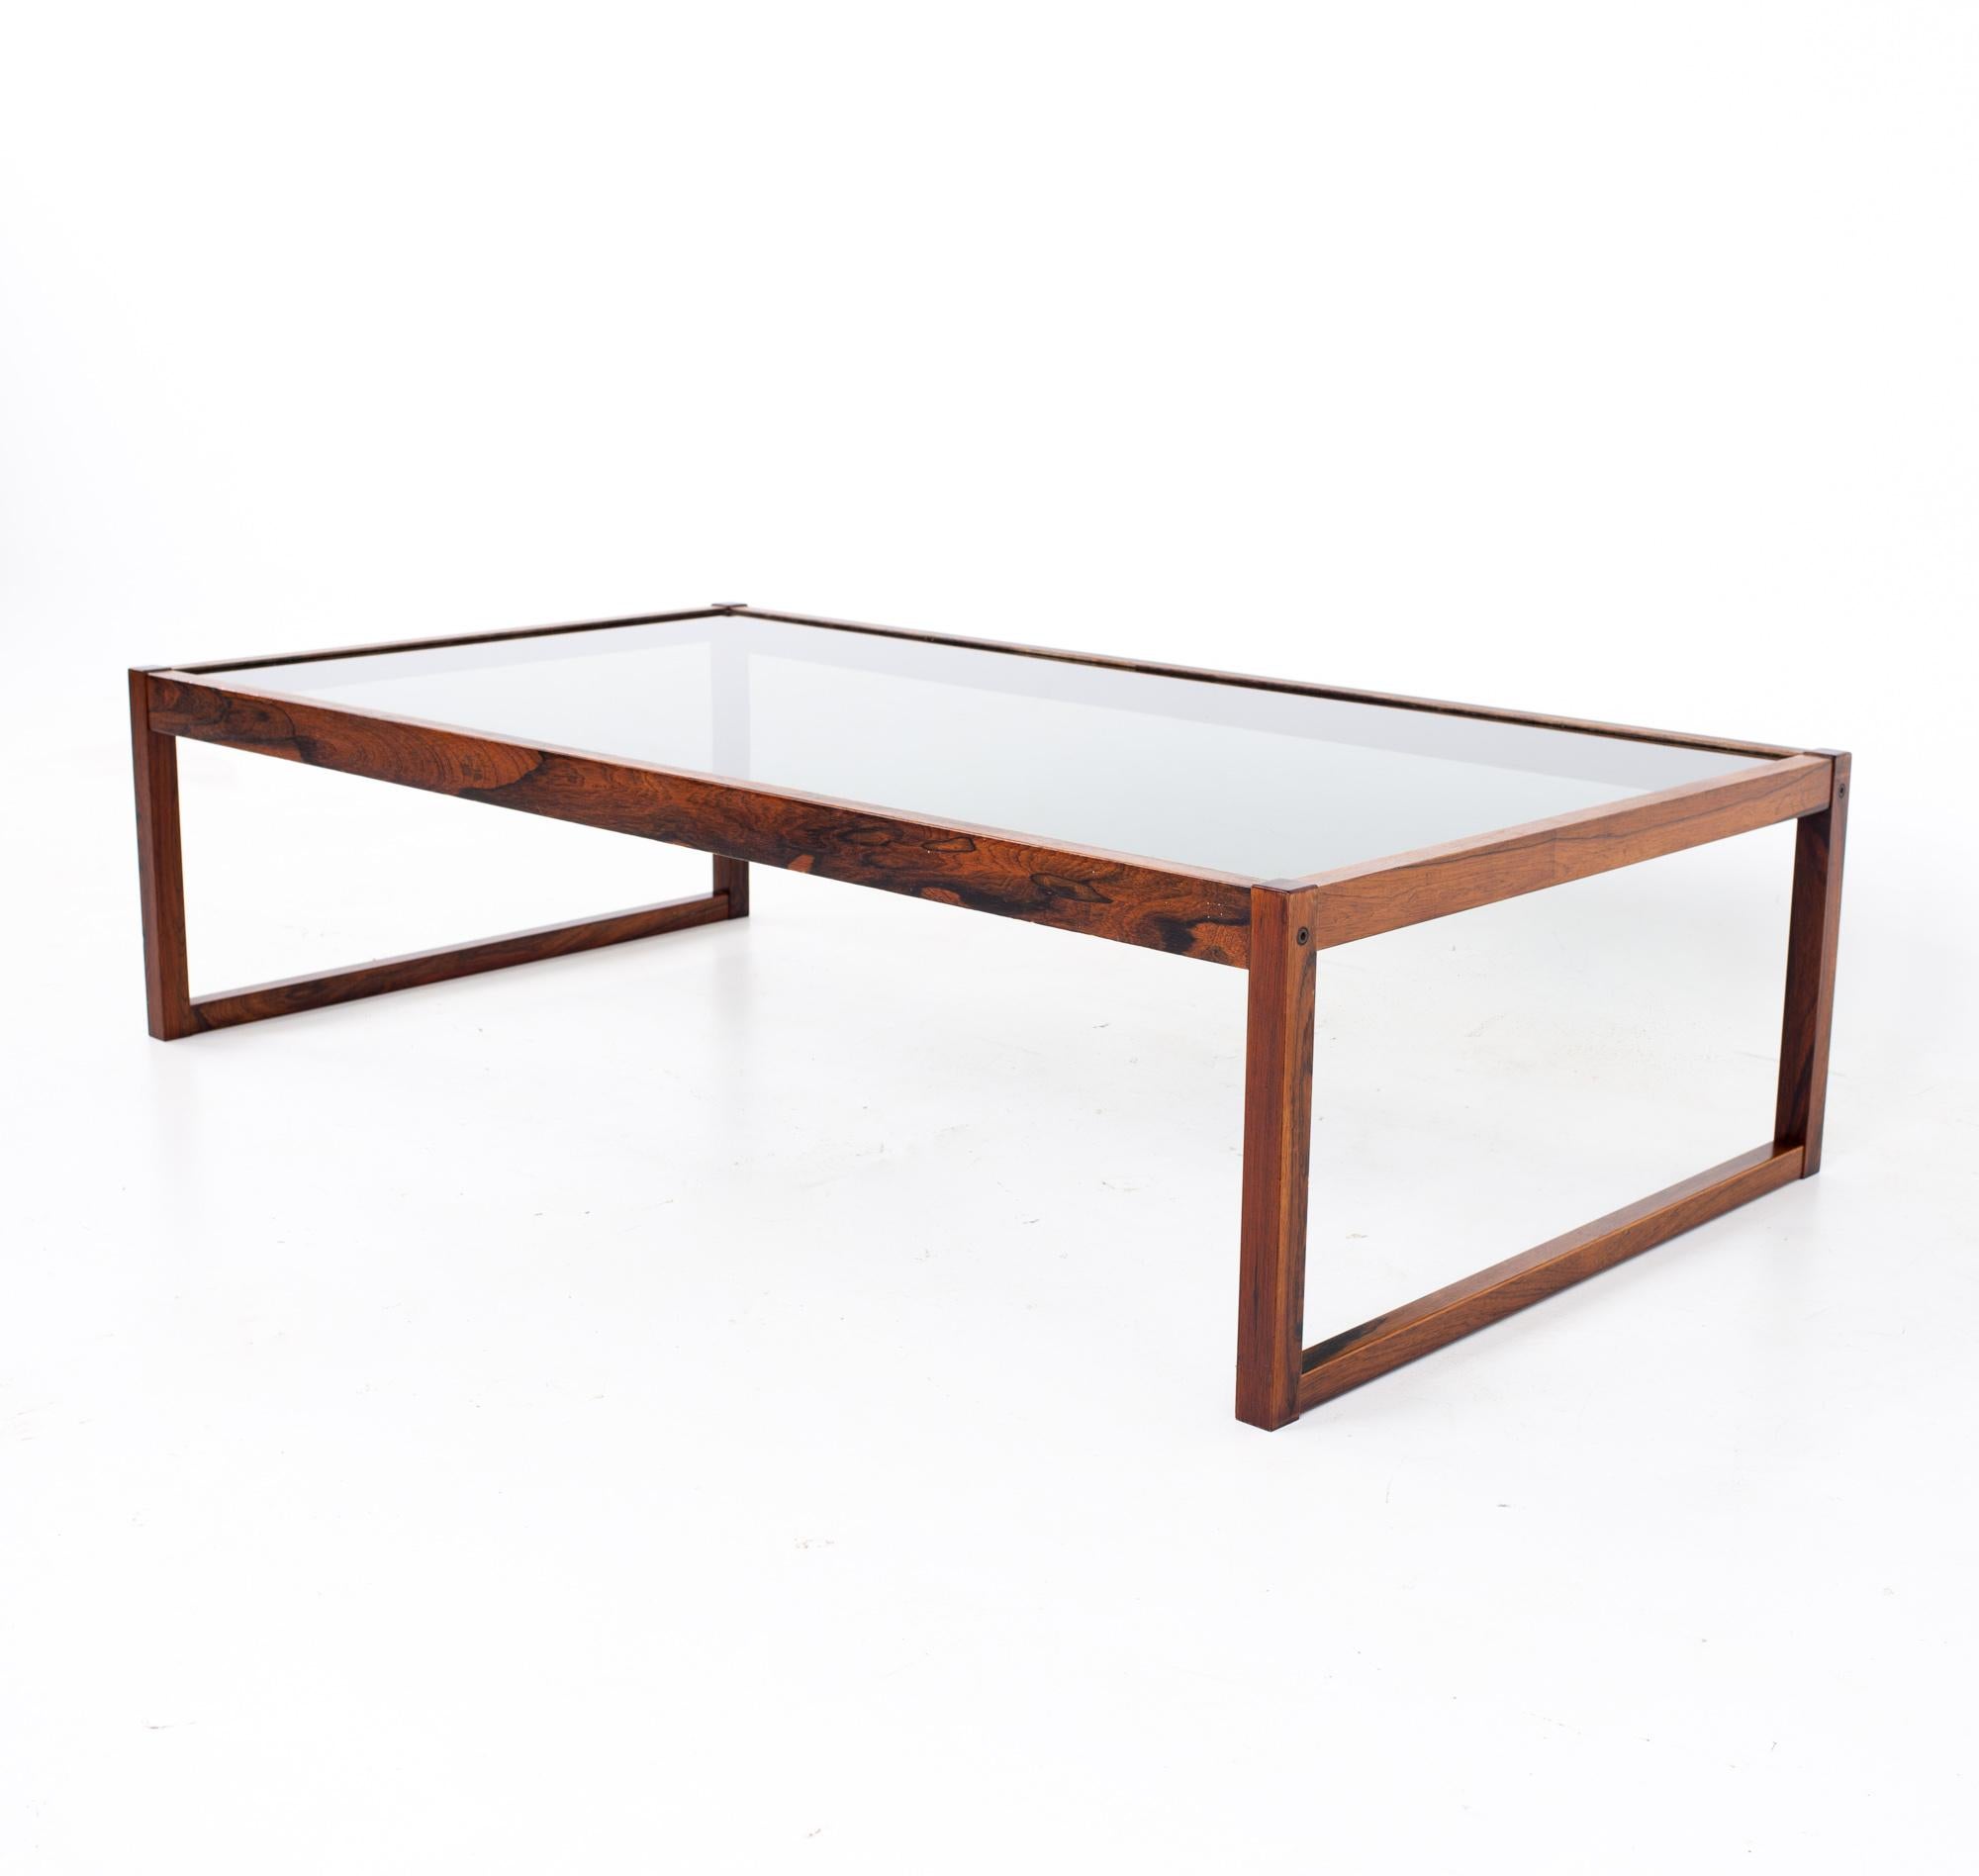 Midcentury rosewood and glass coffee table
Table measures: 57 wide x 31 deep x 15 inches high

All pieces of furniture can be had in what we call restored vintage condition. That means the piece is restored upon purchase so it’s free of